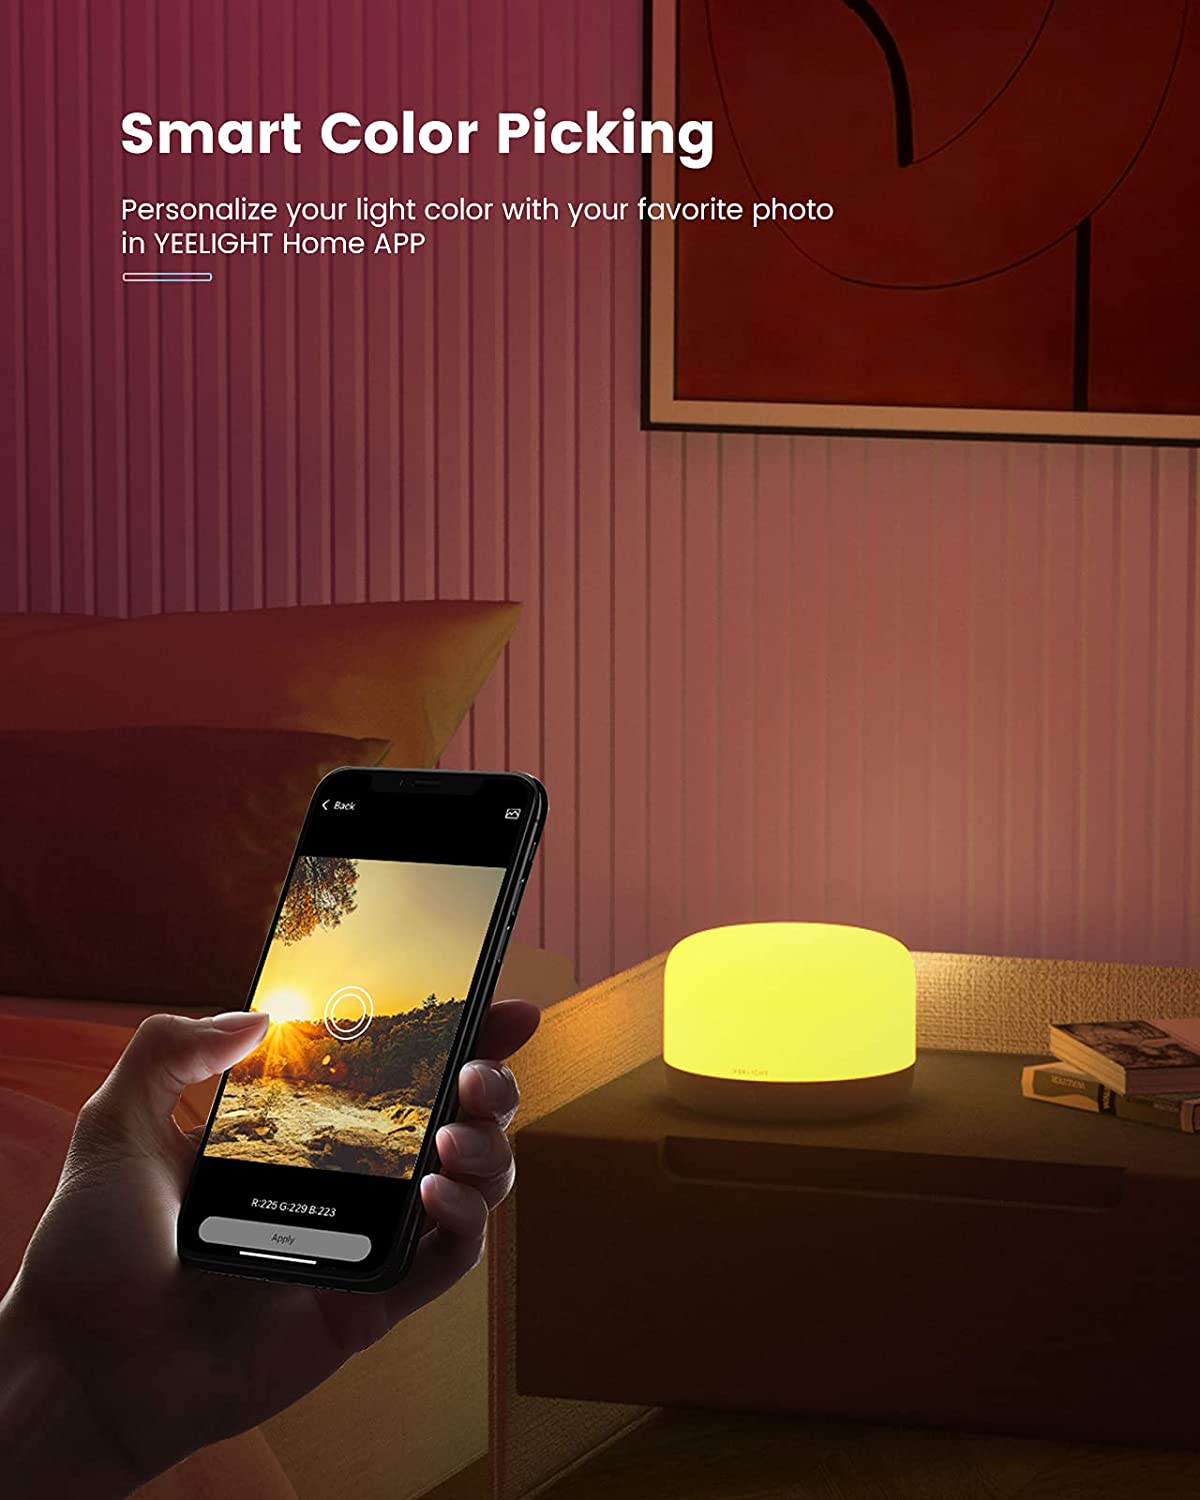 YEELIGHT Smart Table Lamp, App Control Bedside Lamp with Music Sync, Dimmable Night Light Touch lamp, RGB Color Changing Lamp for Bedroom, Living Room, Works with HomeKit, Alexa & Google Assistant